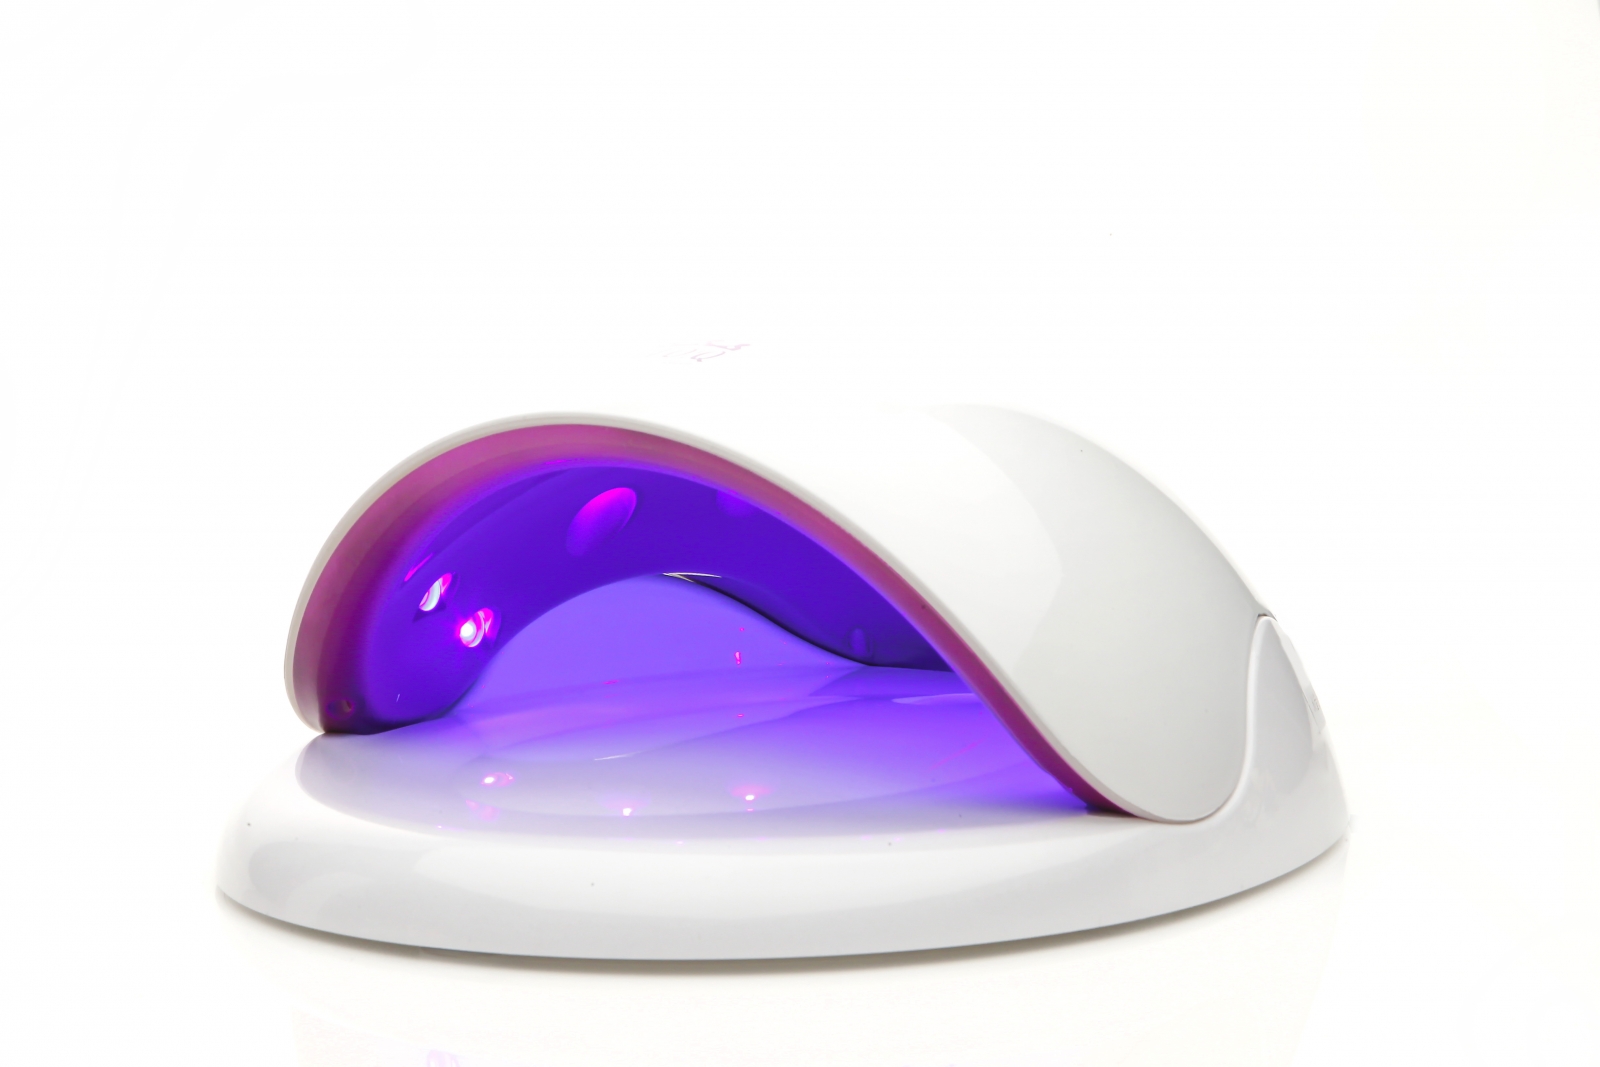 NOQ Nail Of Queen KL-S1 LED Salon System